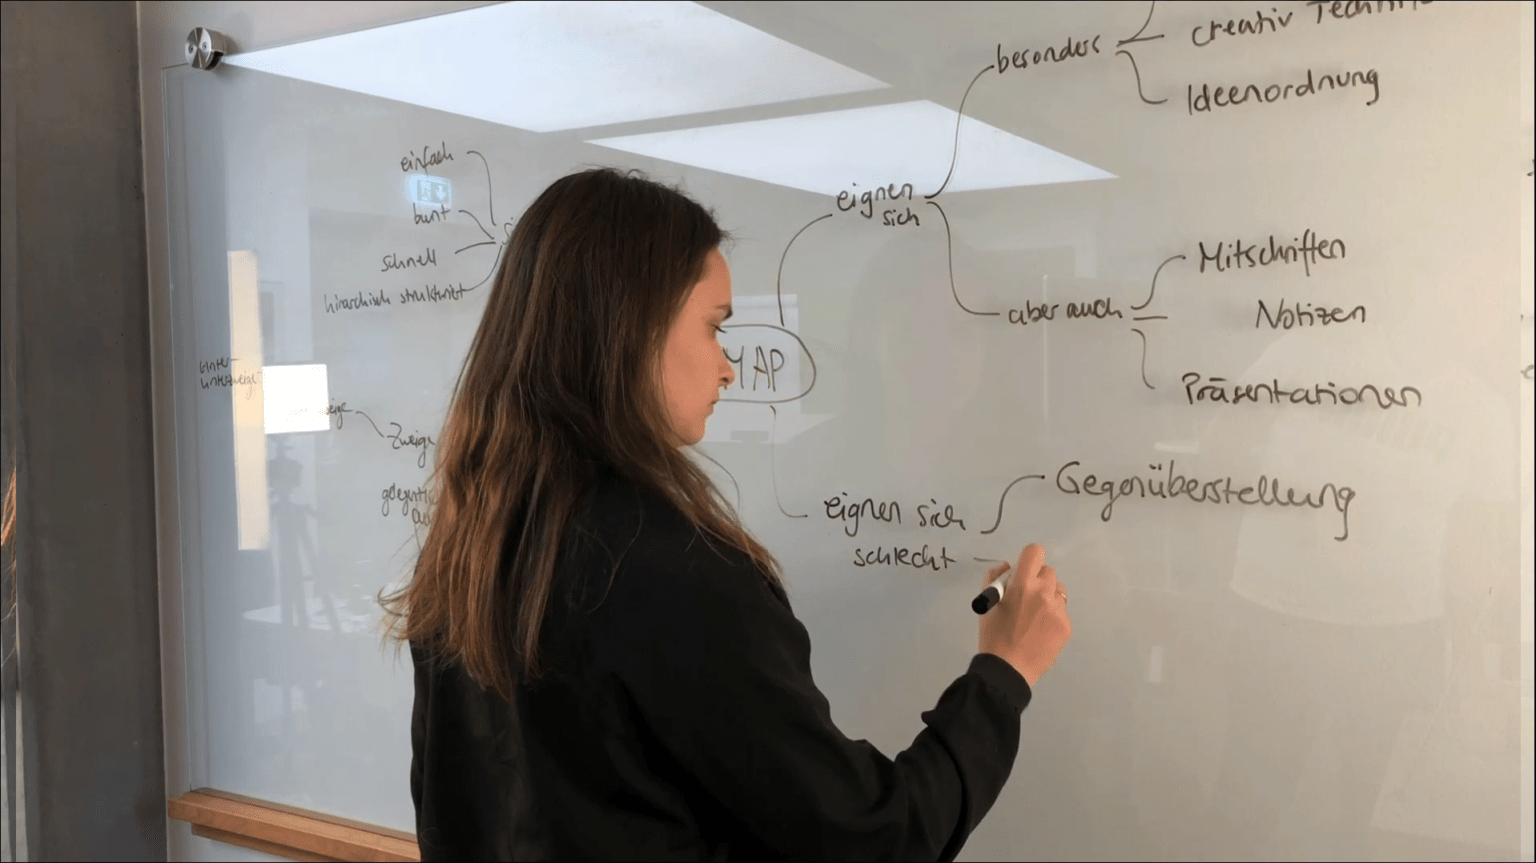 Photo of a woman drawing a mind map on a whiteboard.